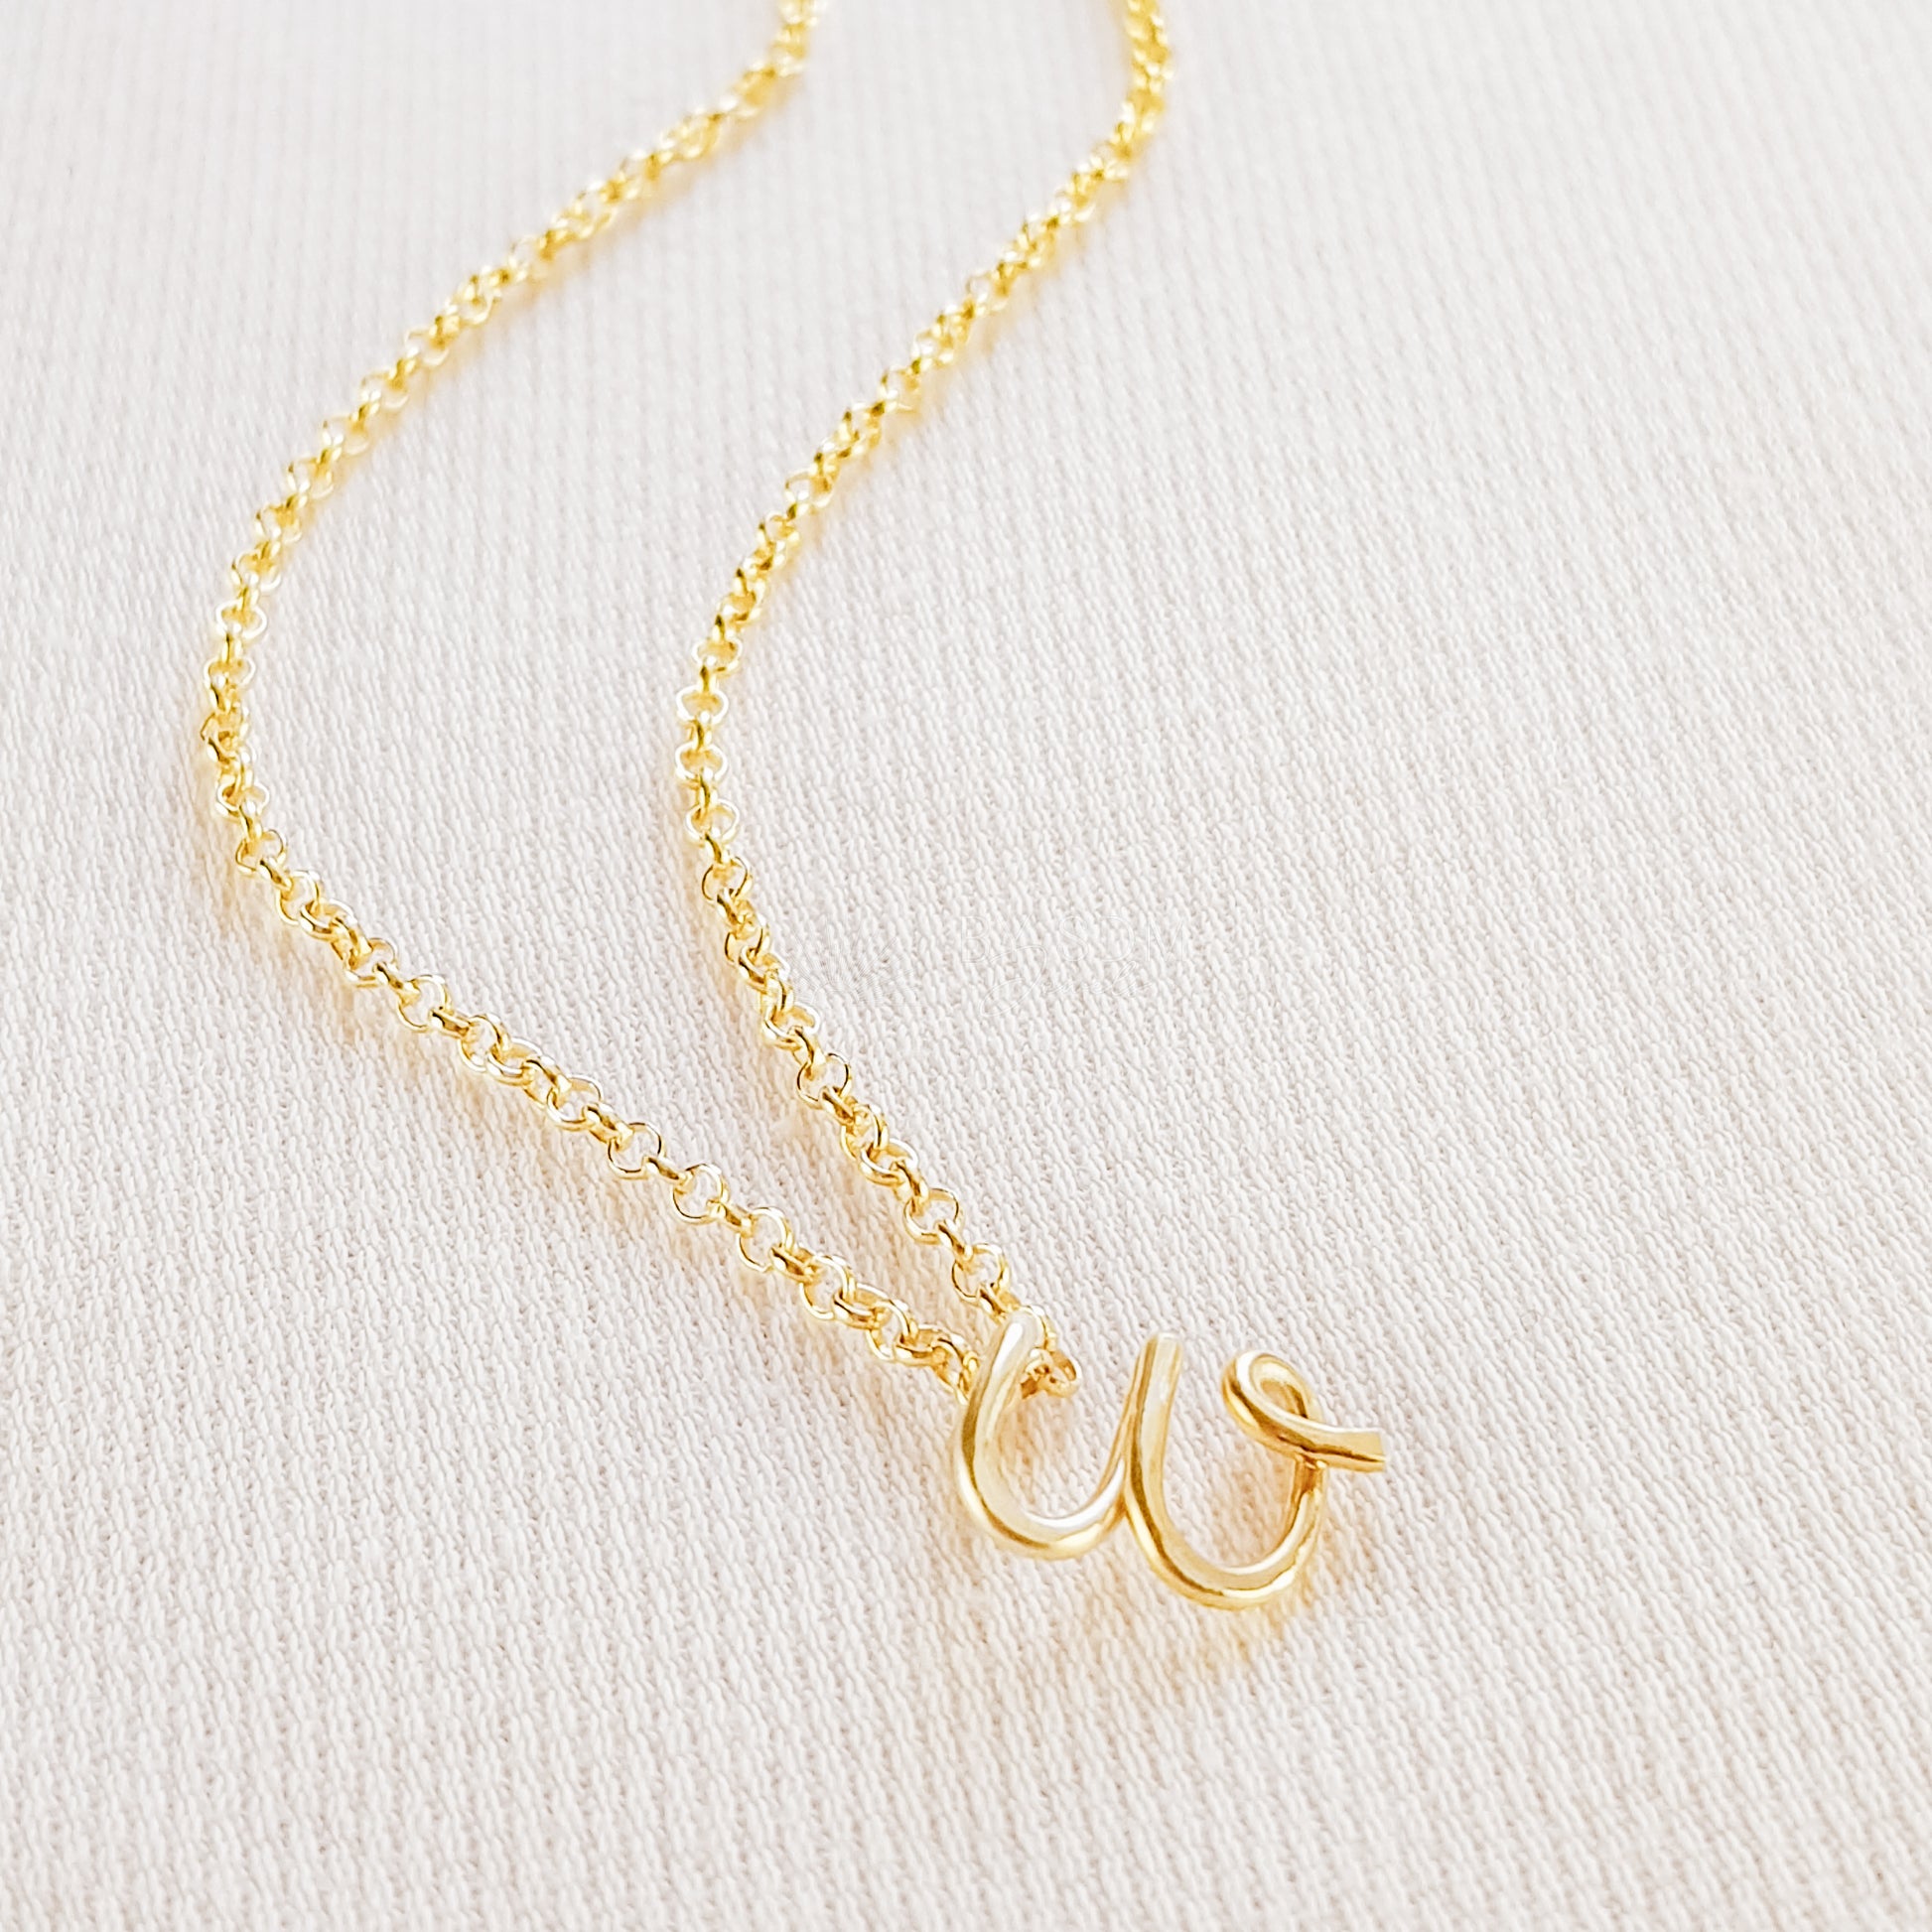 G Initial Necklace • Personalized Name Necklace • Letter Necklace • Gold Necklace • Wife Gifts • Gifts For Mom • Moms Gift • Birthday Gift